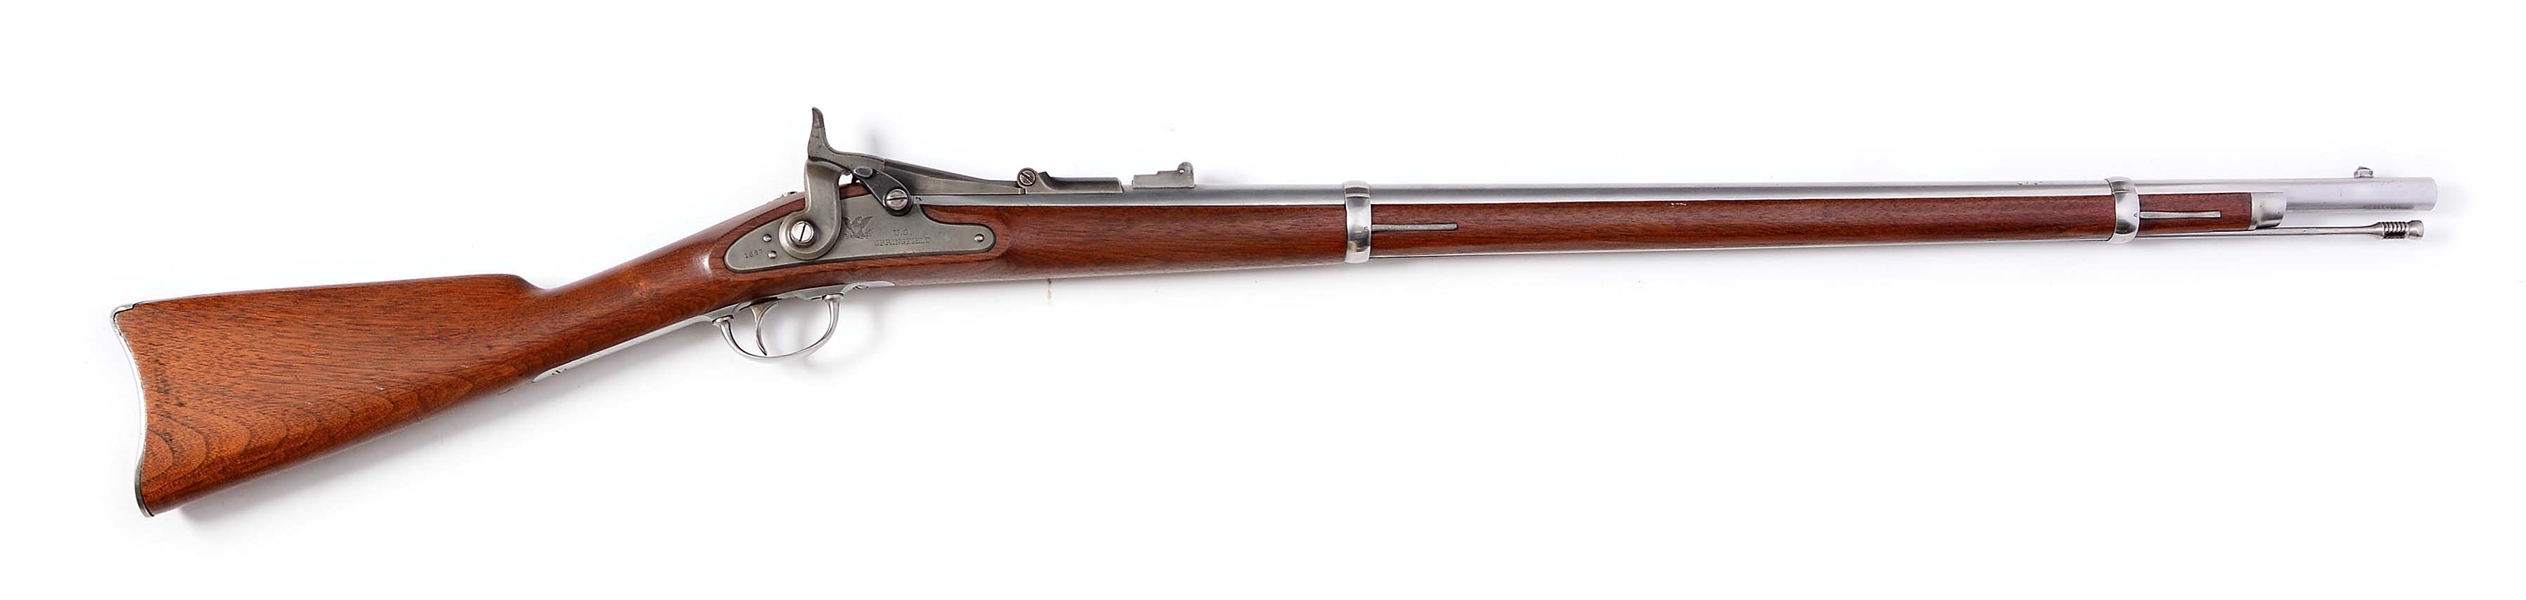 (A) EXTREMELY RARE U.S. SPRINGFIELD MODEL 1867 "CADET" TRAPDOOR RIFLE.